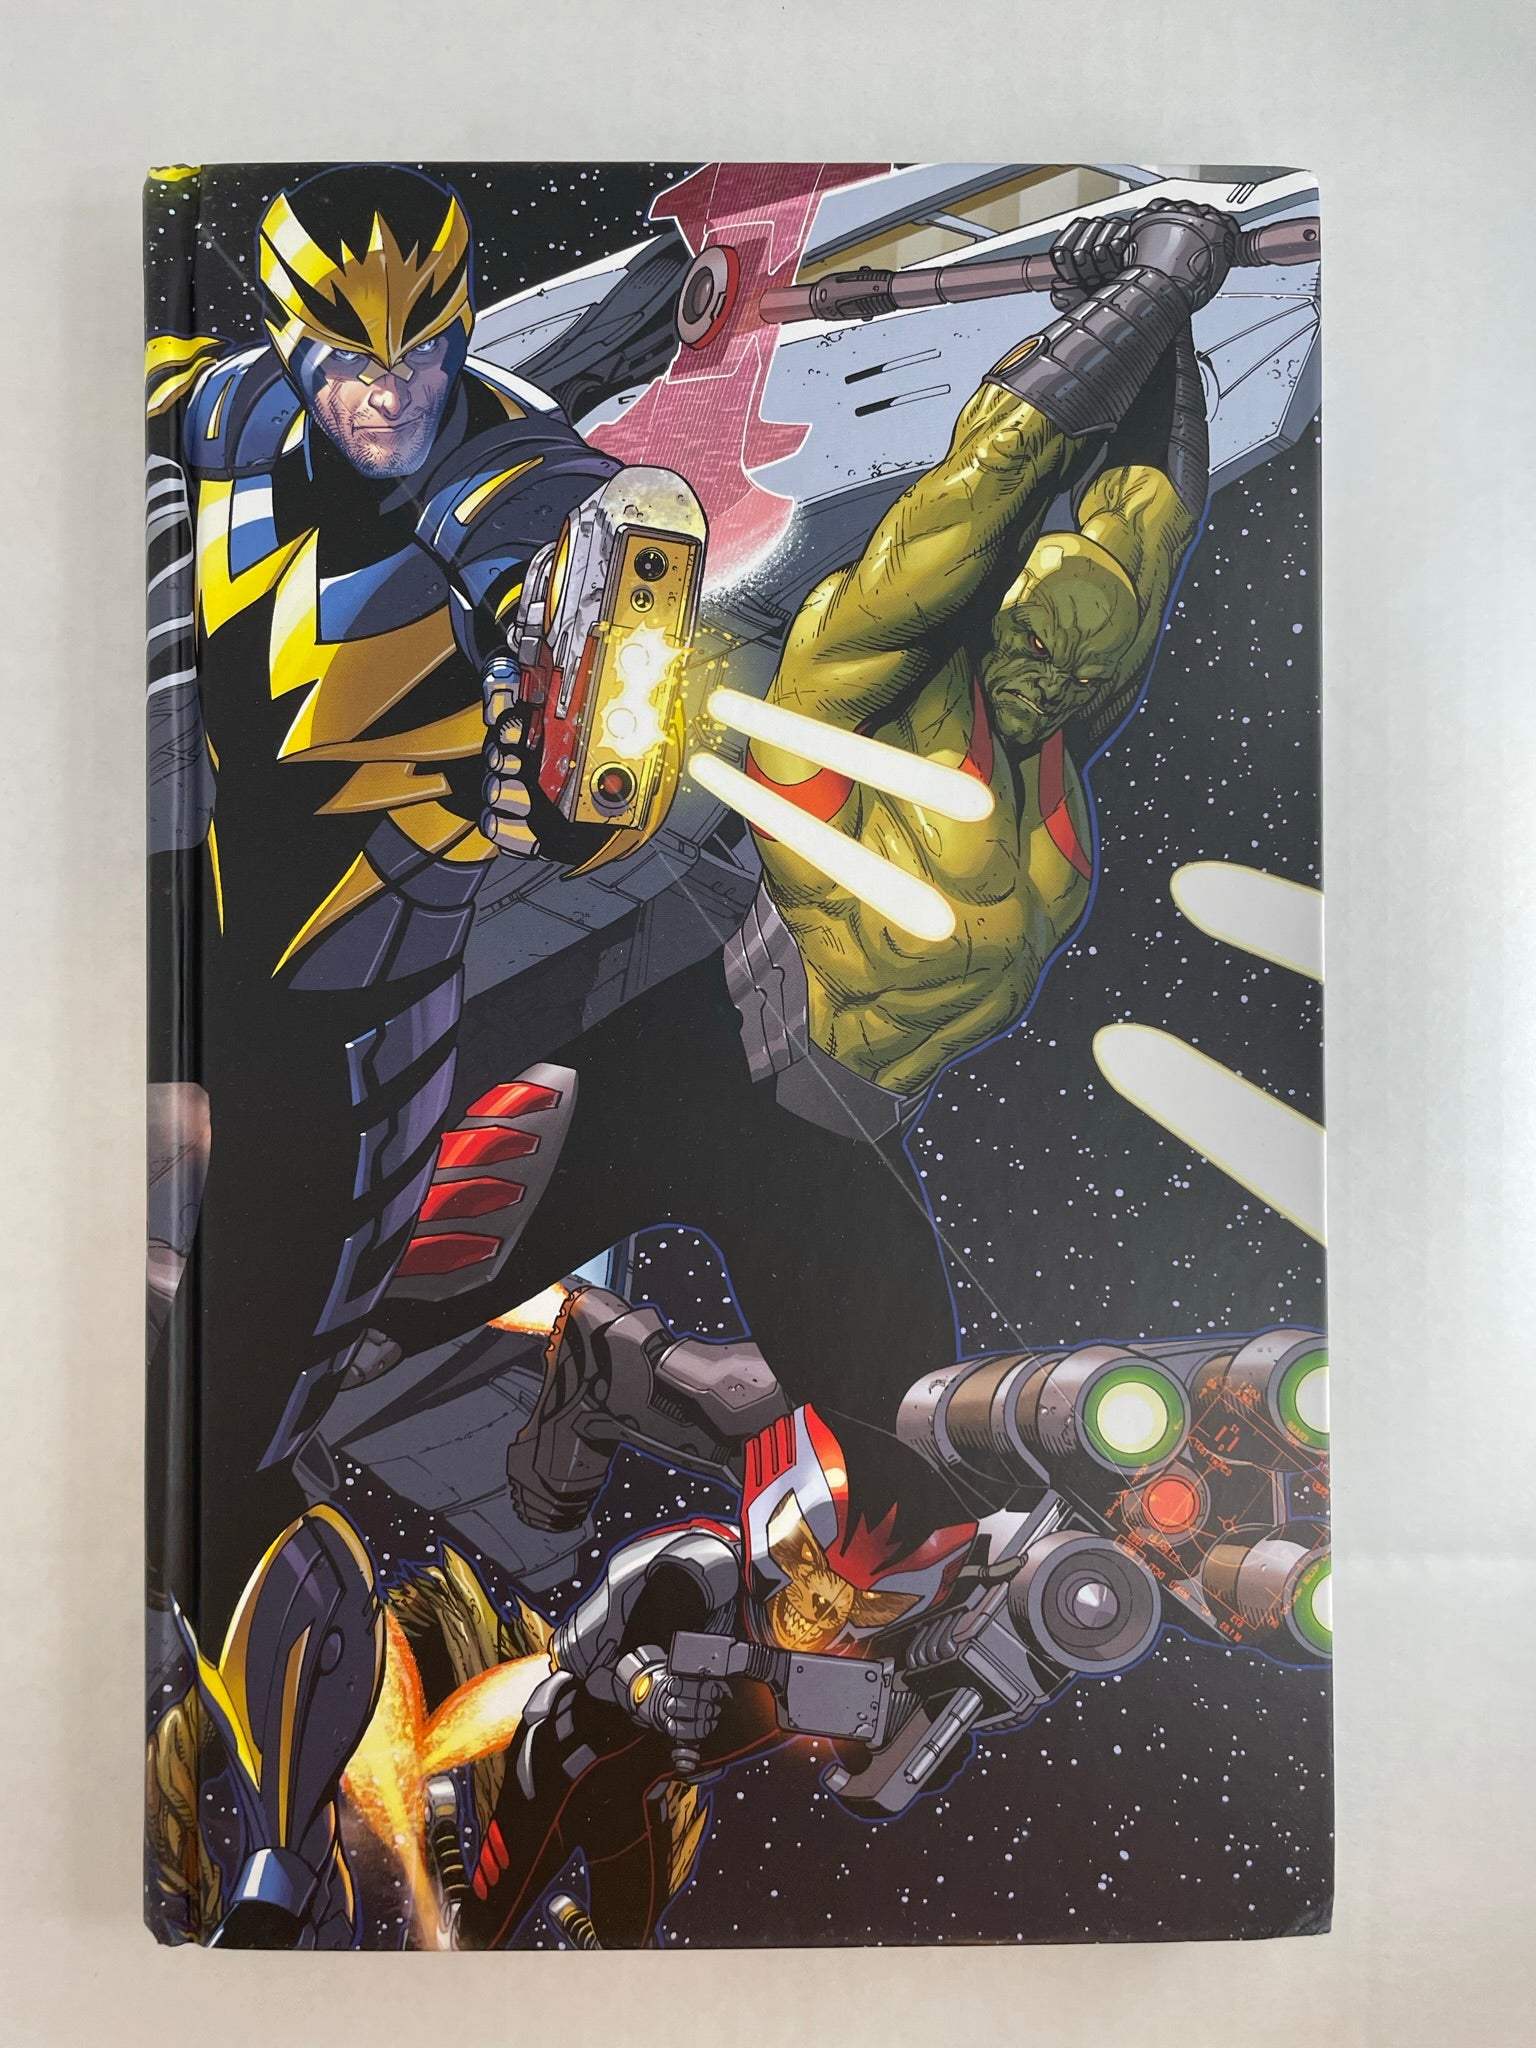 GUARDIANS OF THE GALAXY VOL. 1 HARDCOVER -- NEW OPEN STOCK